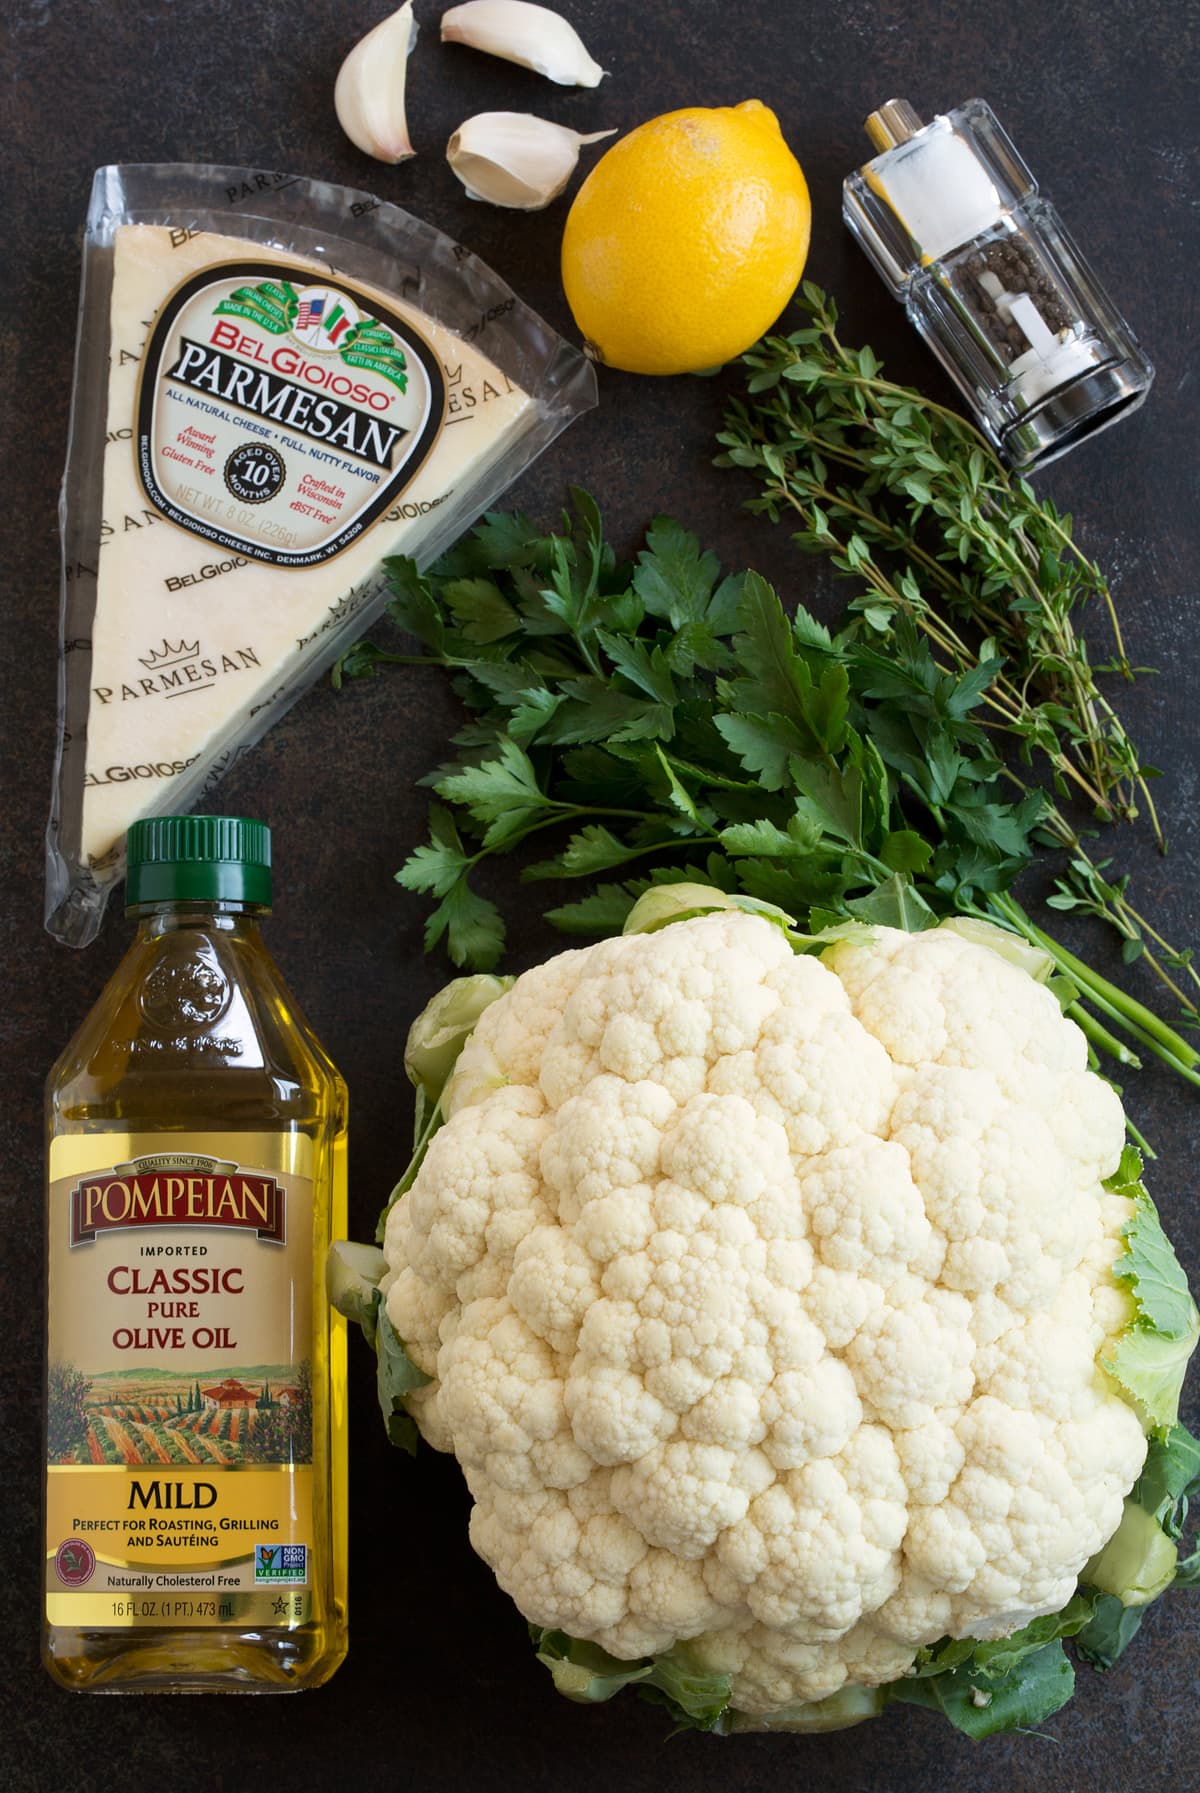 Image of ingredients used to make roasted cauliflower. Includes whole head of cauliflower, olive oil, salt and pepper then optional seasonings garlic, lemon, parmesan and fresh herbs.